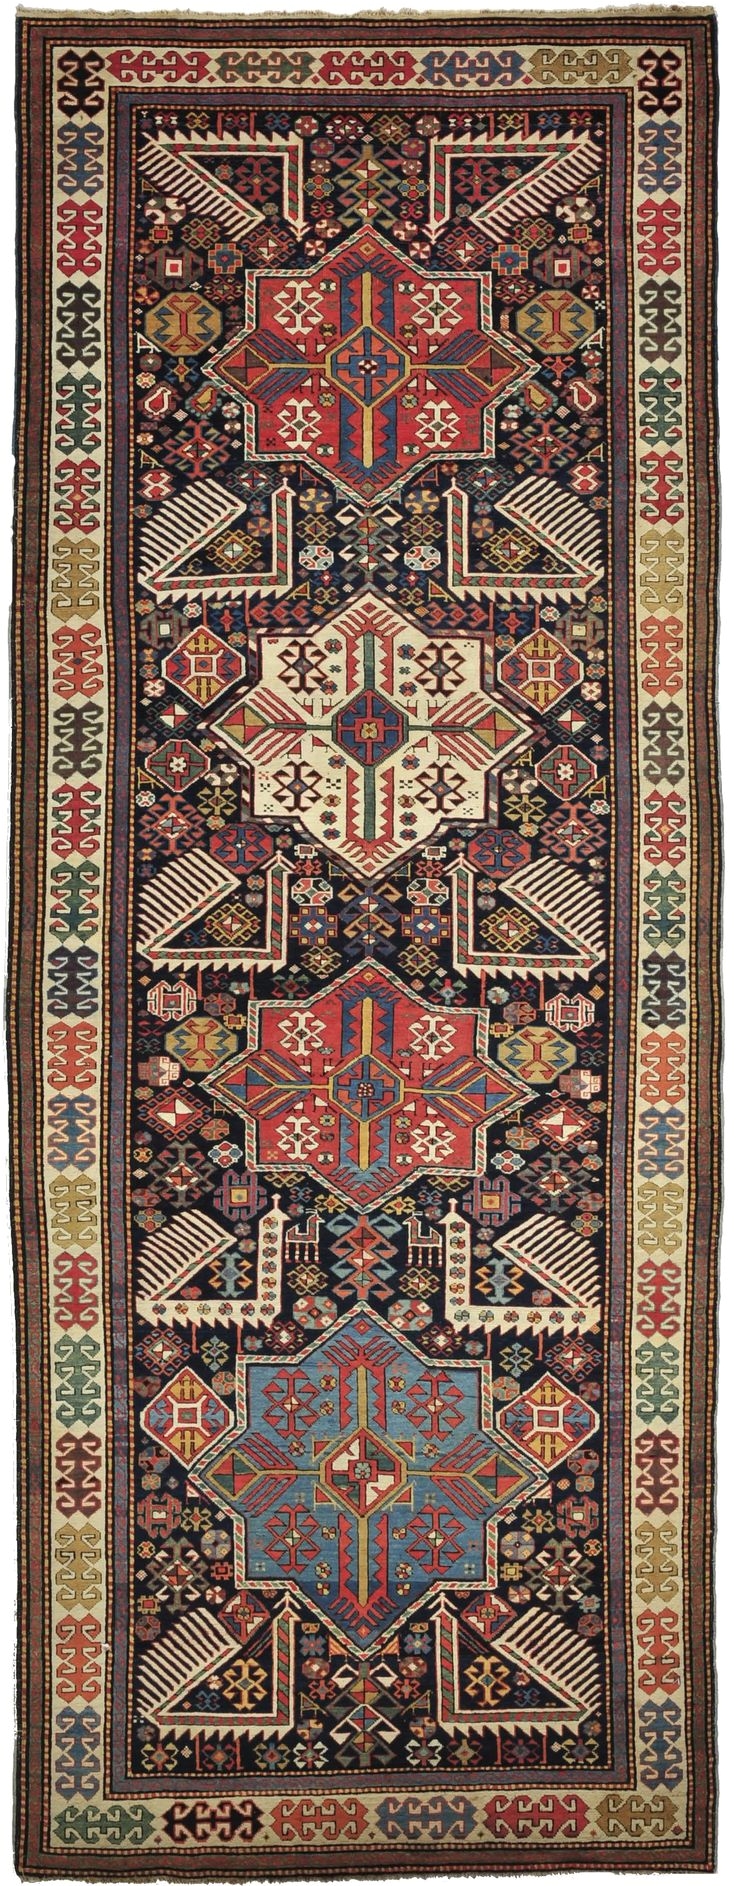 Oriental Rug Cleaning San Francisco 392 Best Carpets and Rugs Images On Pinterest Tapestries Tapestry